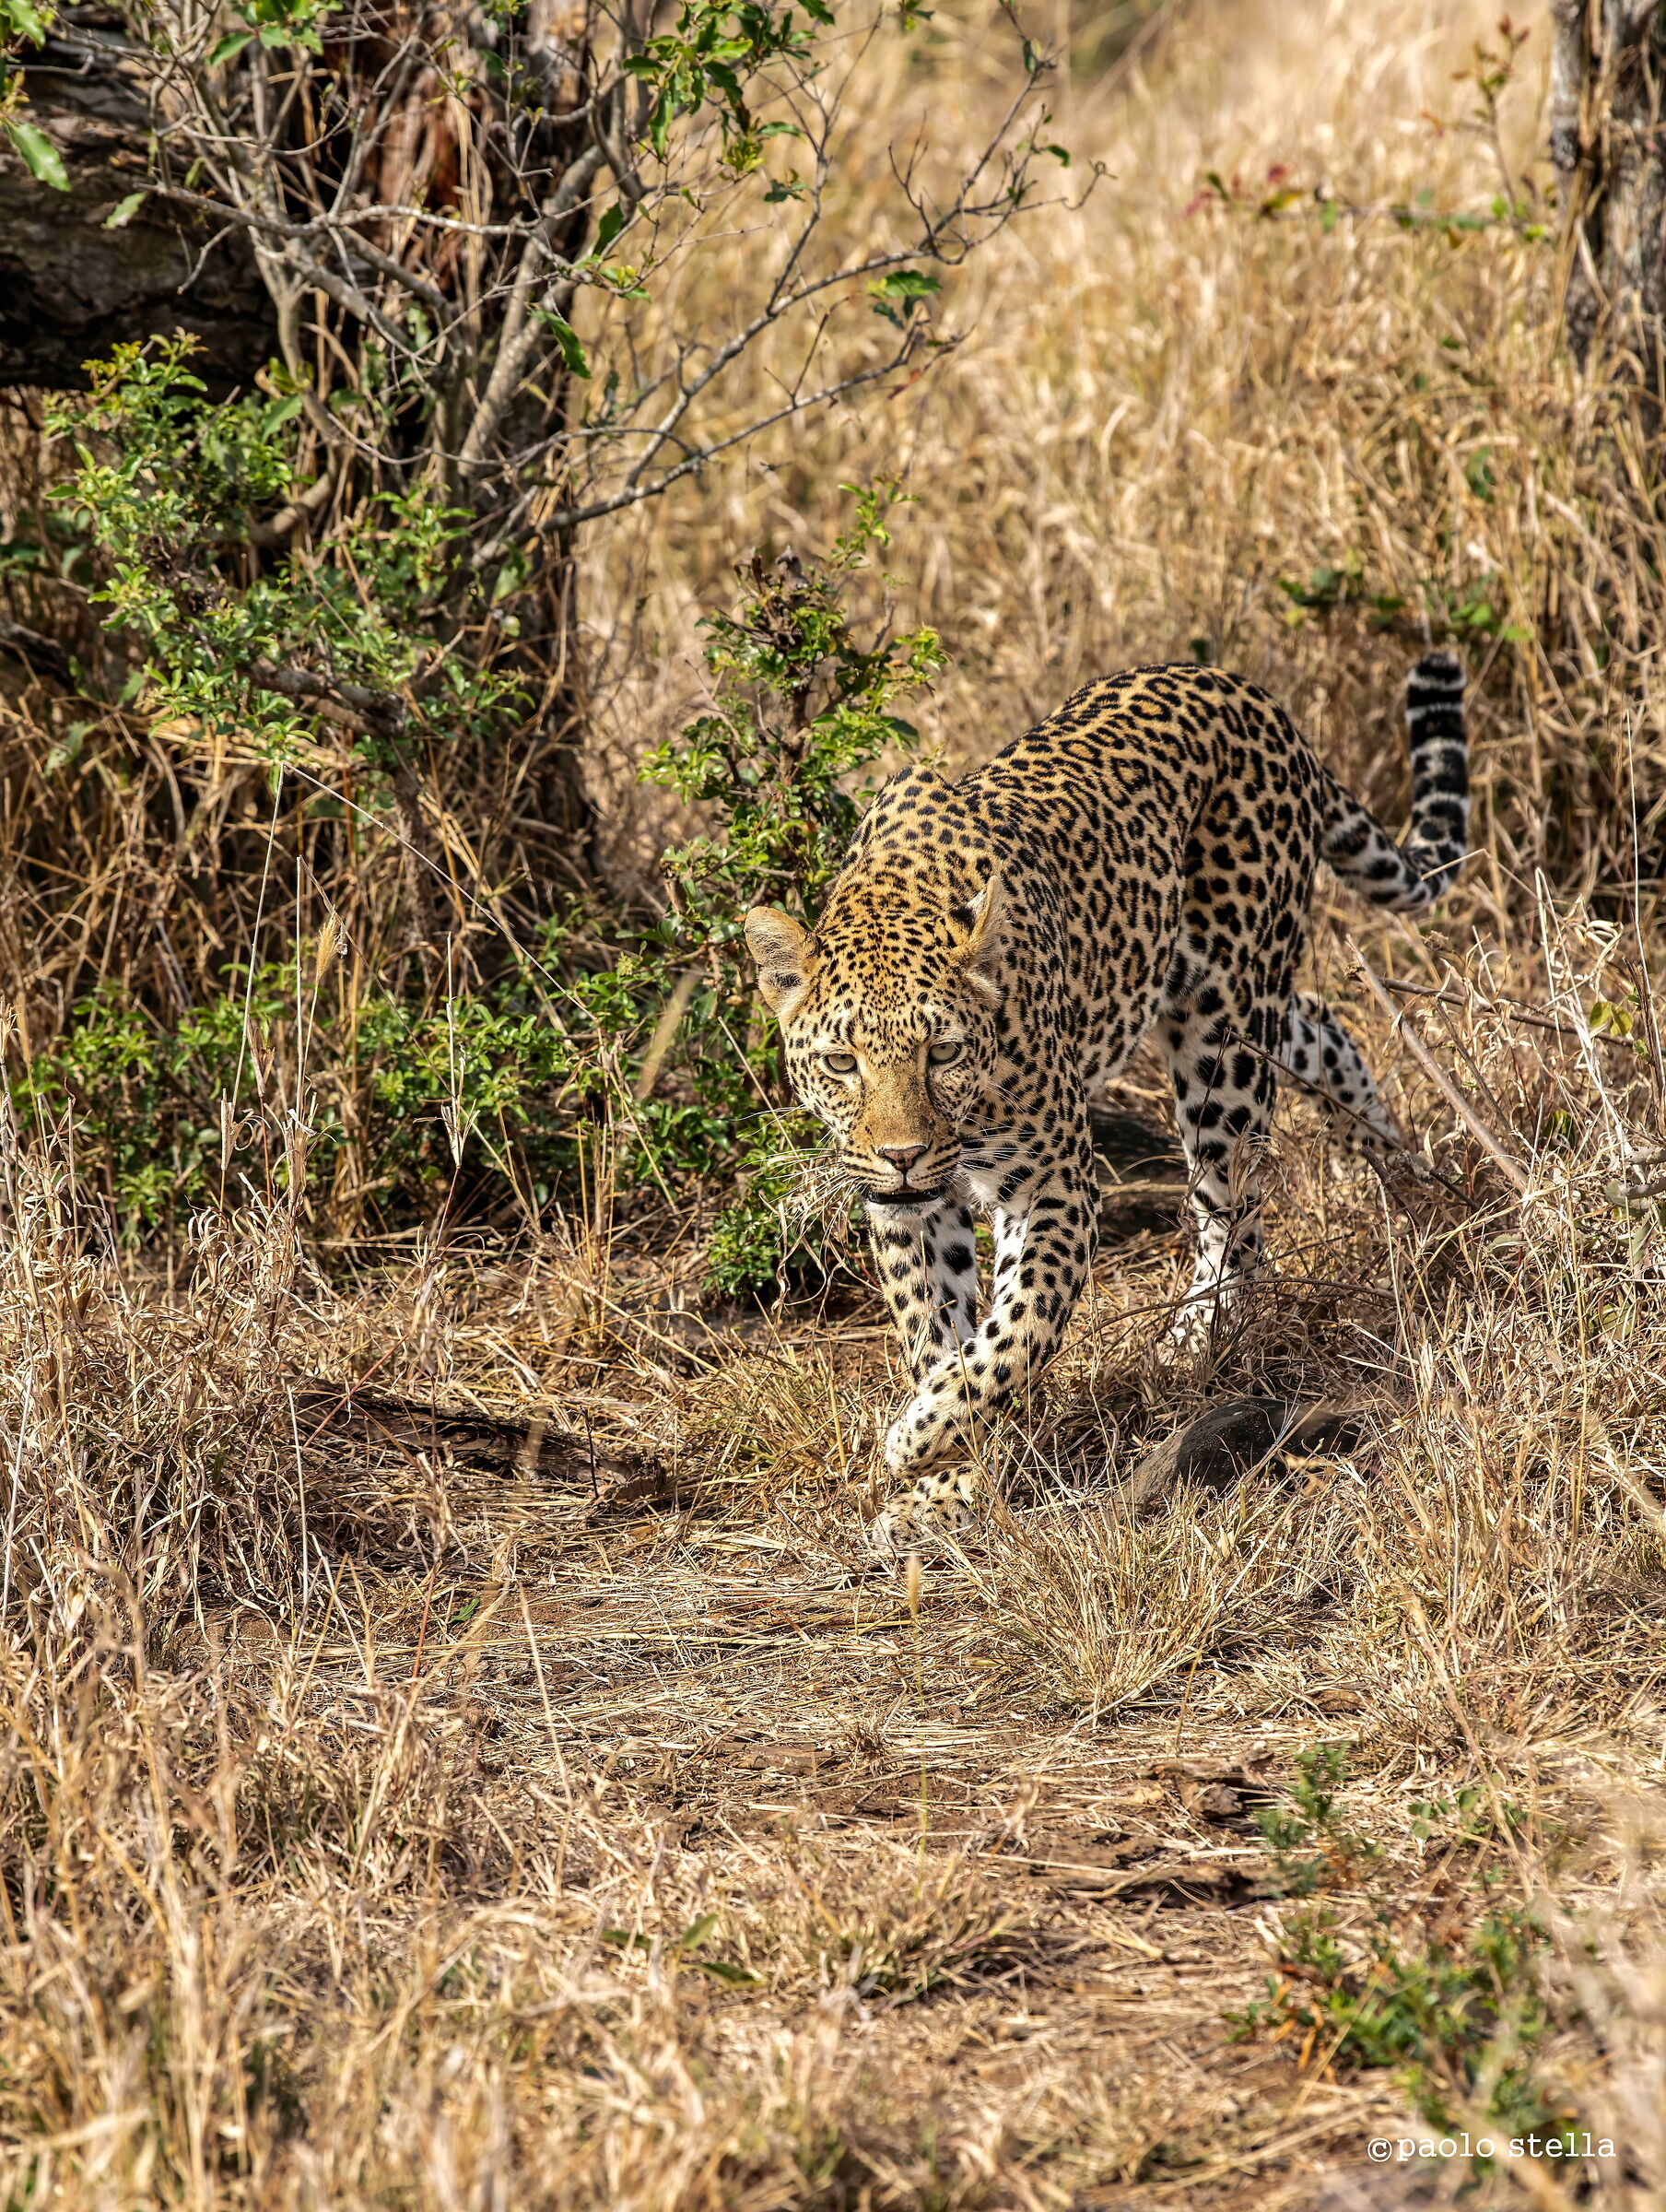 The leopard on the hunt...